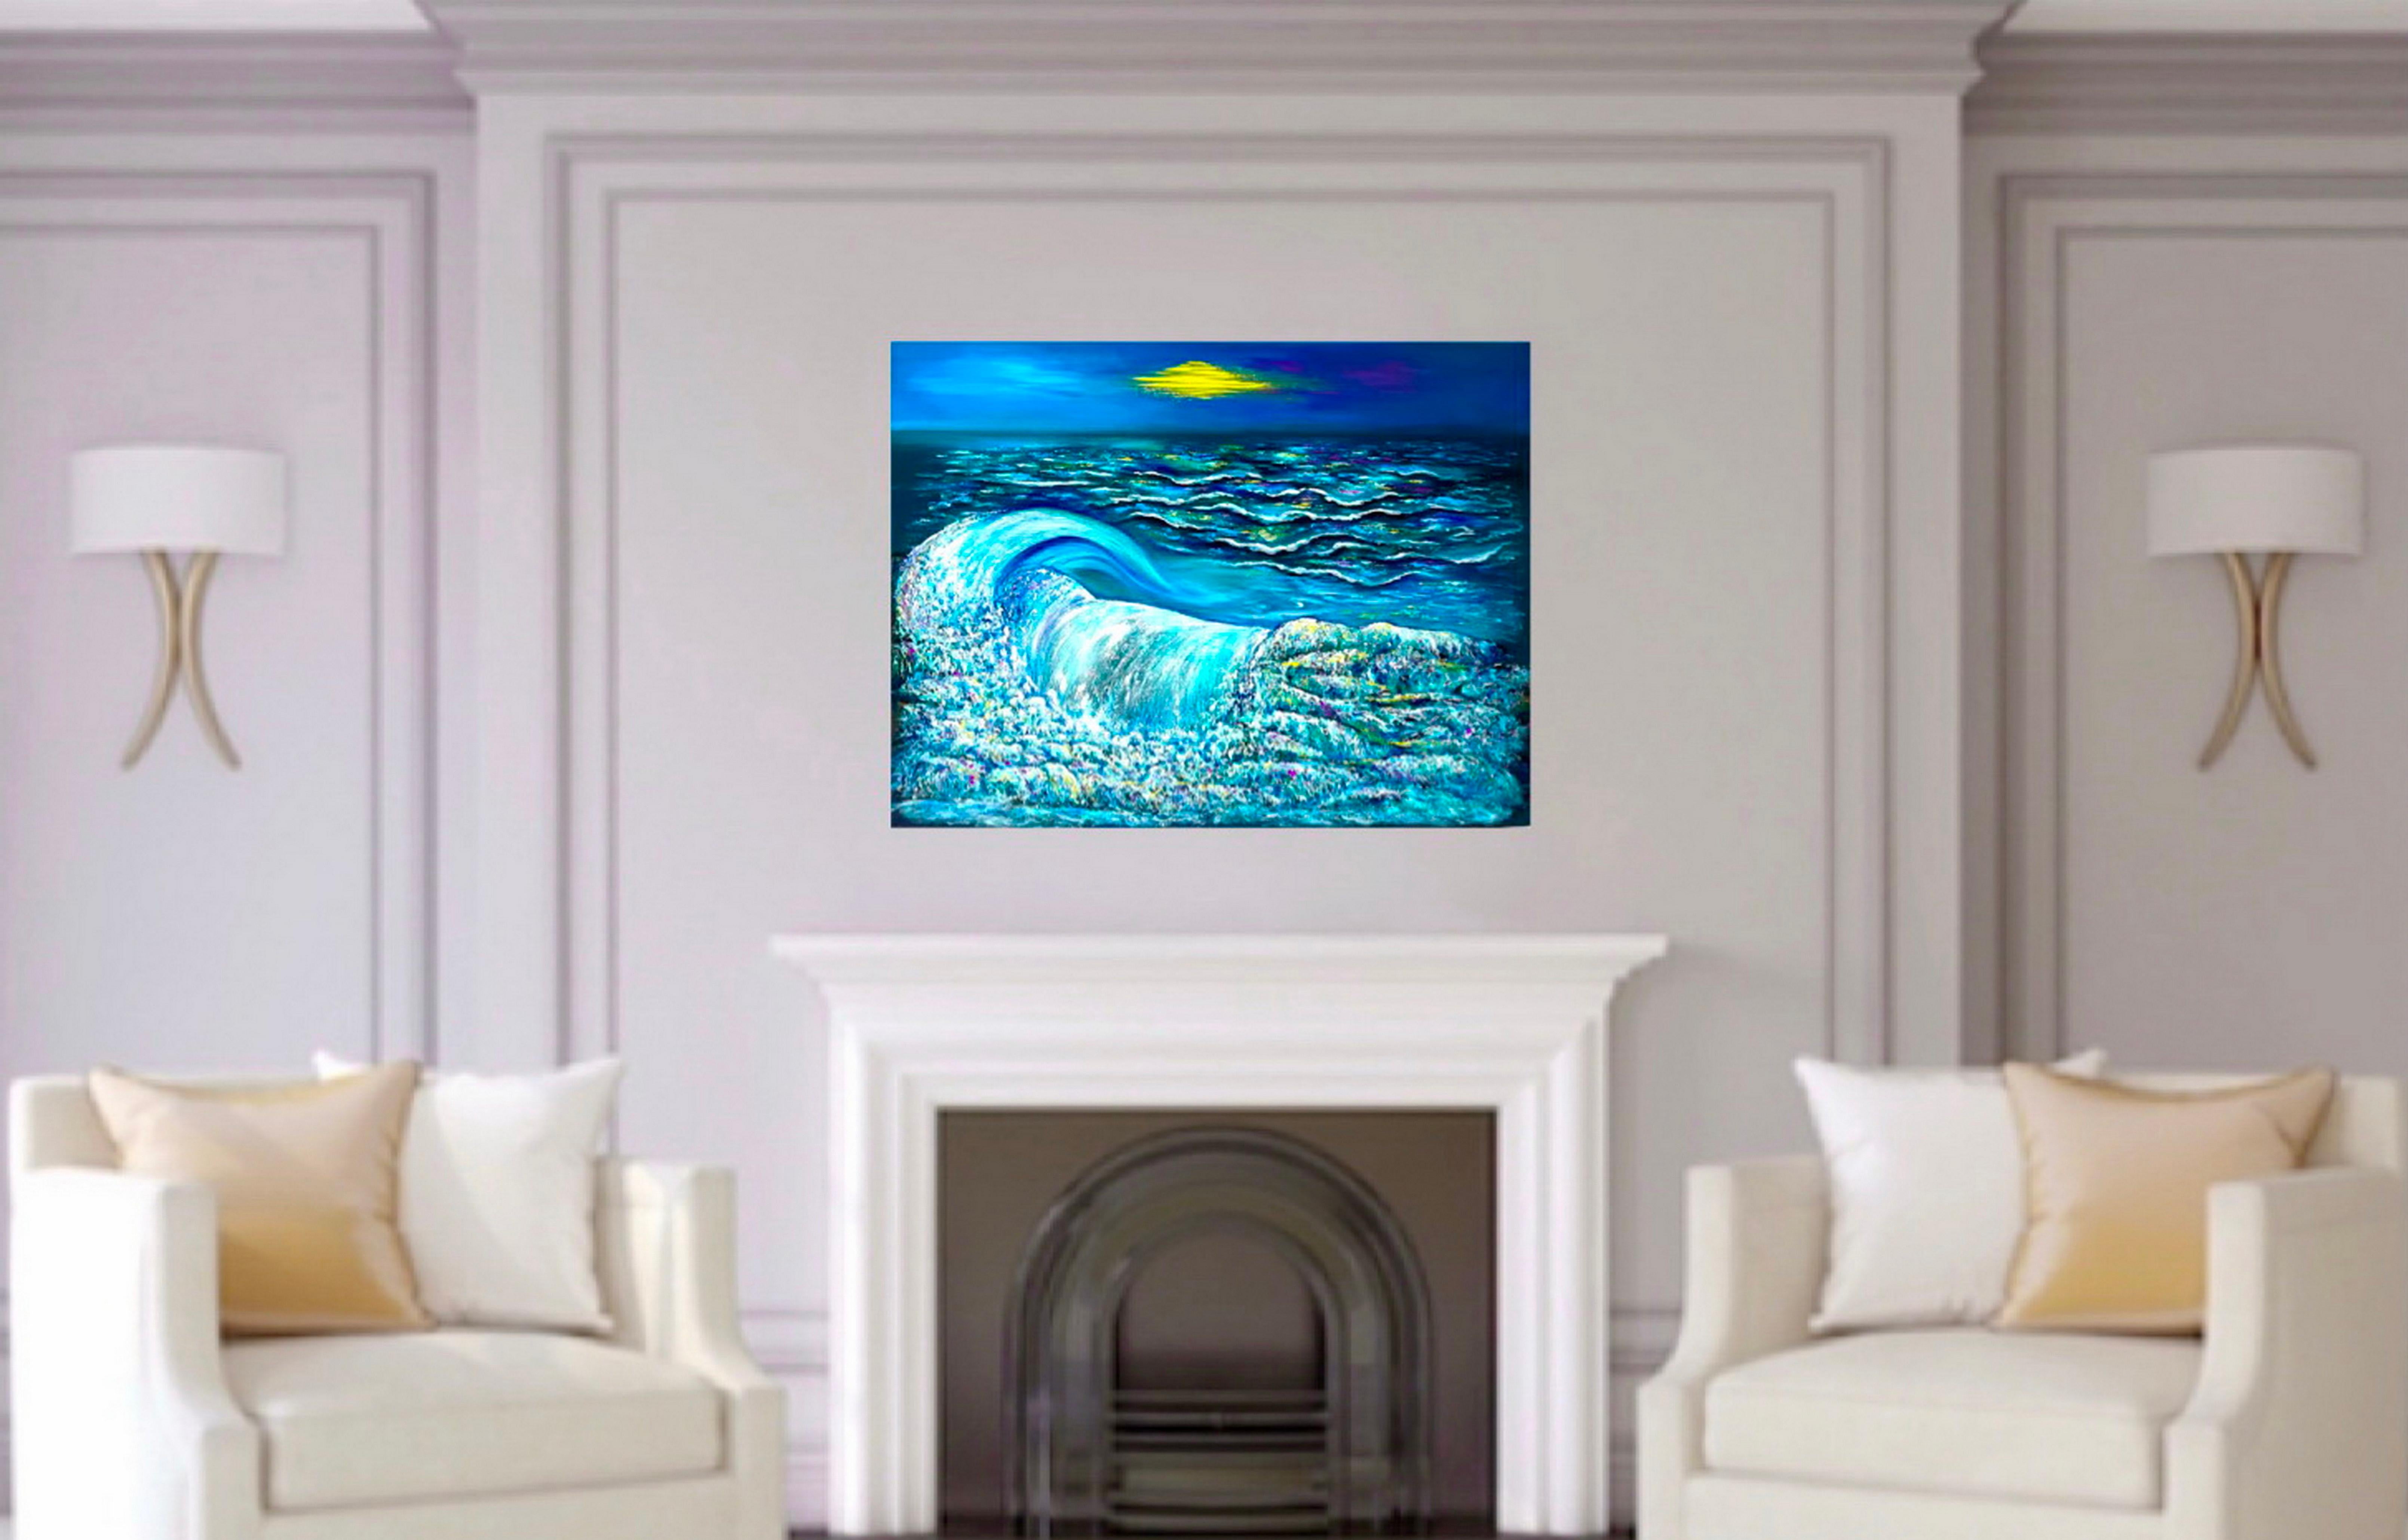  Peaceful Evening. Oil painting, Impressionist style. Sea / Waves / Water/ Moon. - Painting by Vik Schroeder 